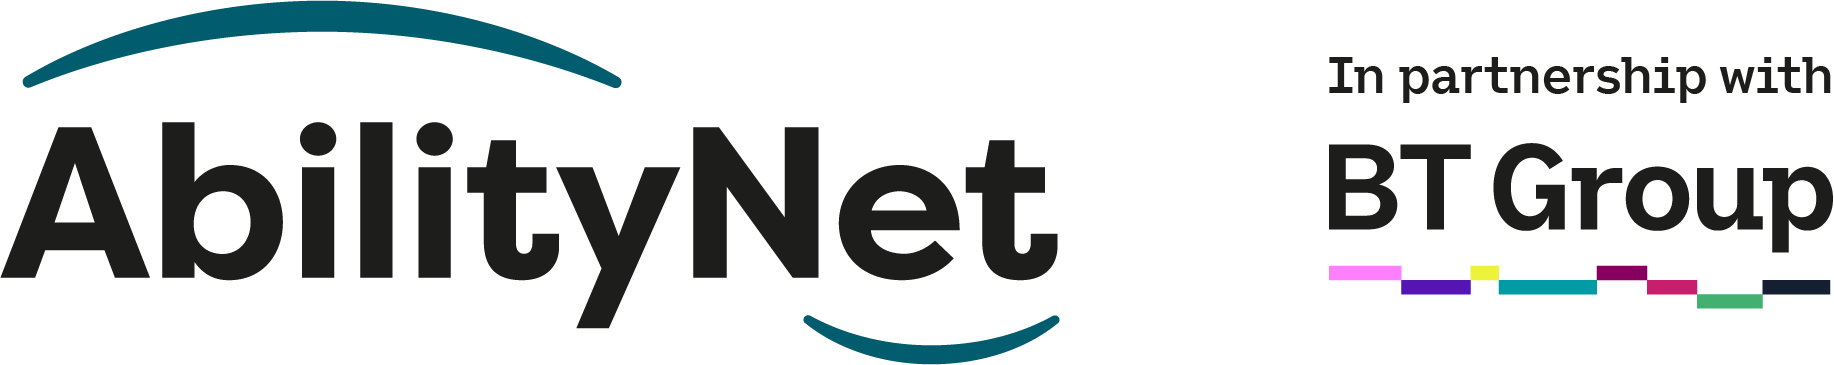 AbilityNet and BT Group logo